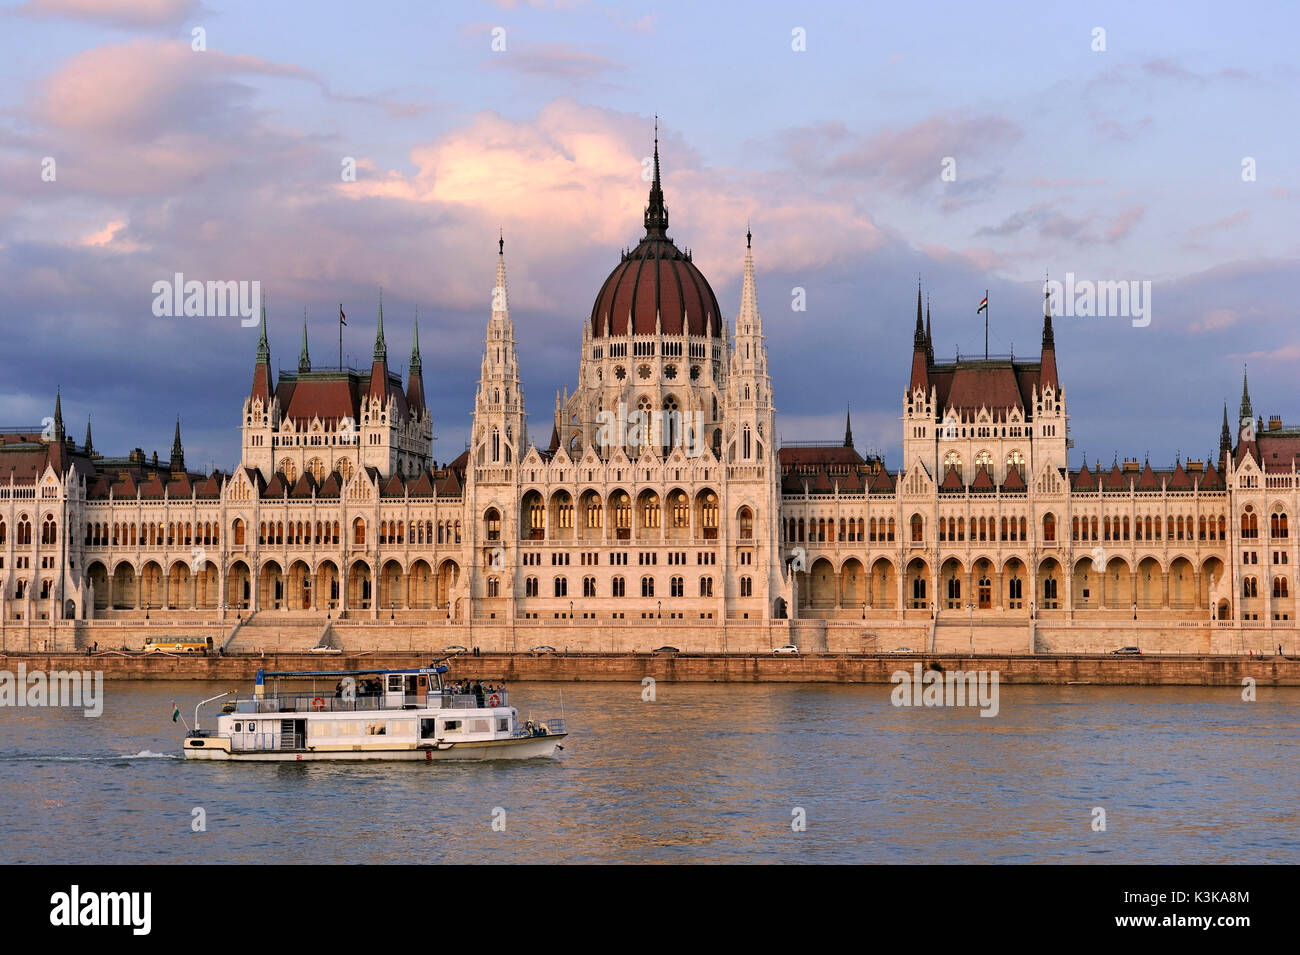 Hungary, Budapest, Pest district, the Parliament along the Danube riverbanks listed as World Heritage by UNESCO Stock Photo